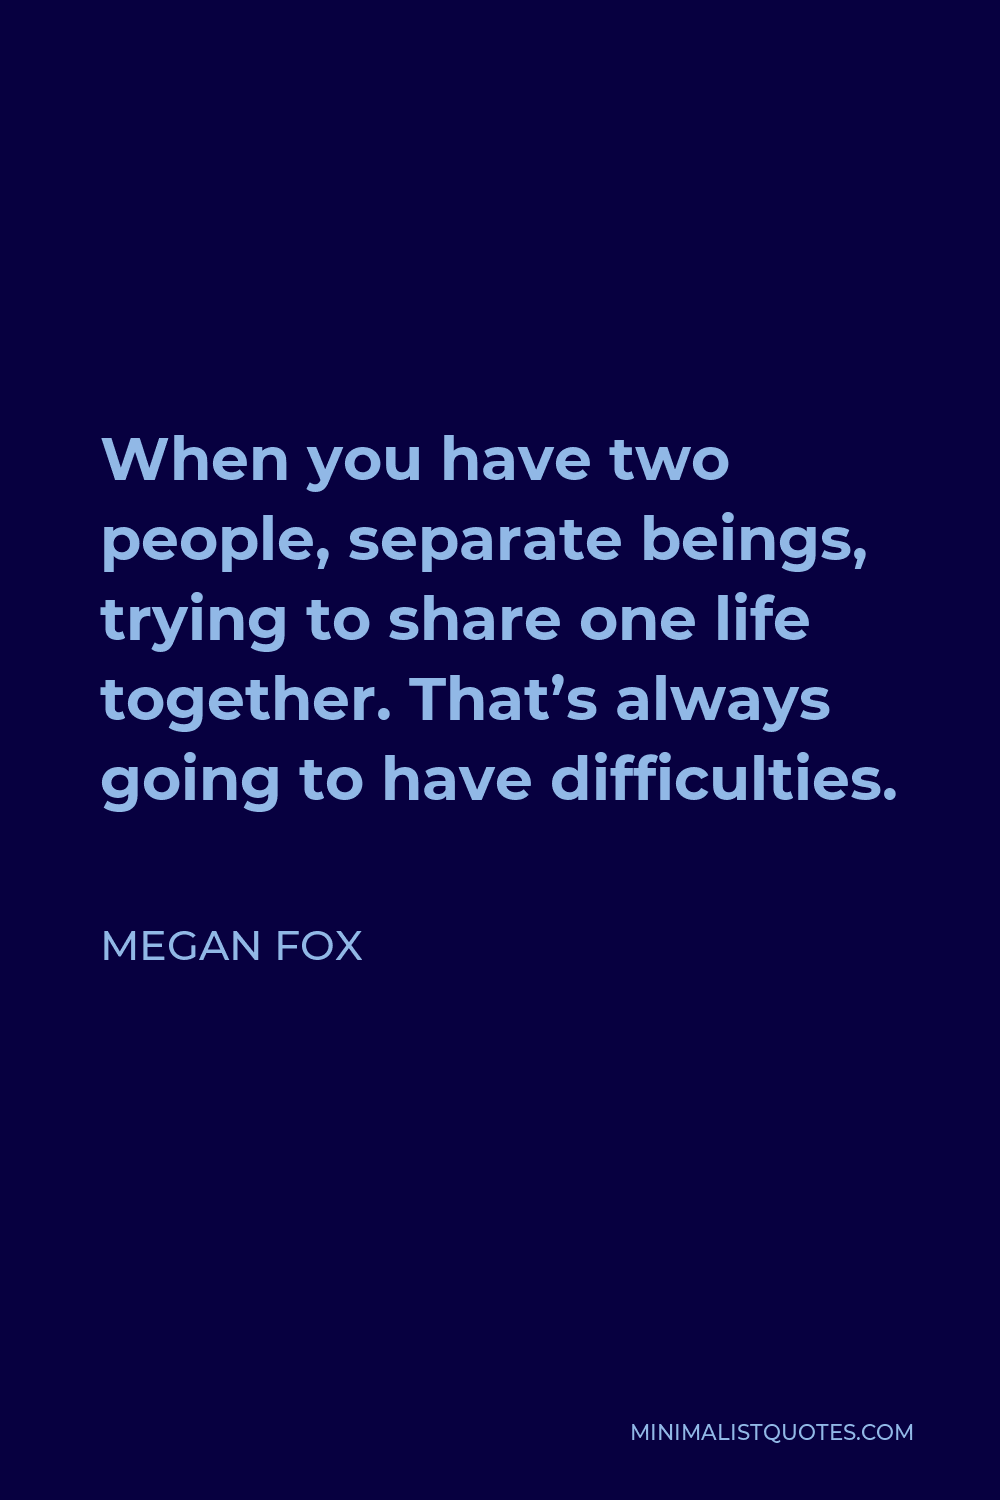 Megan Fox Quote - When you have two people, separate beings, trying to share one life together. That’s always going to have difficulties.